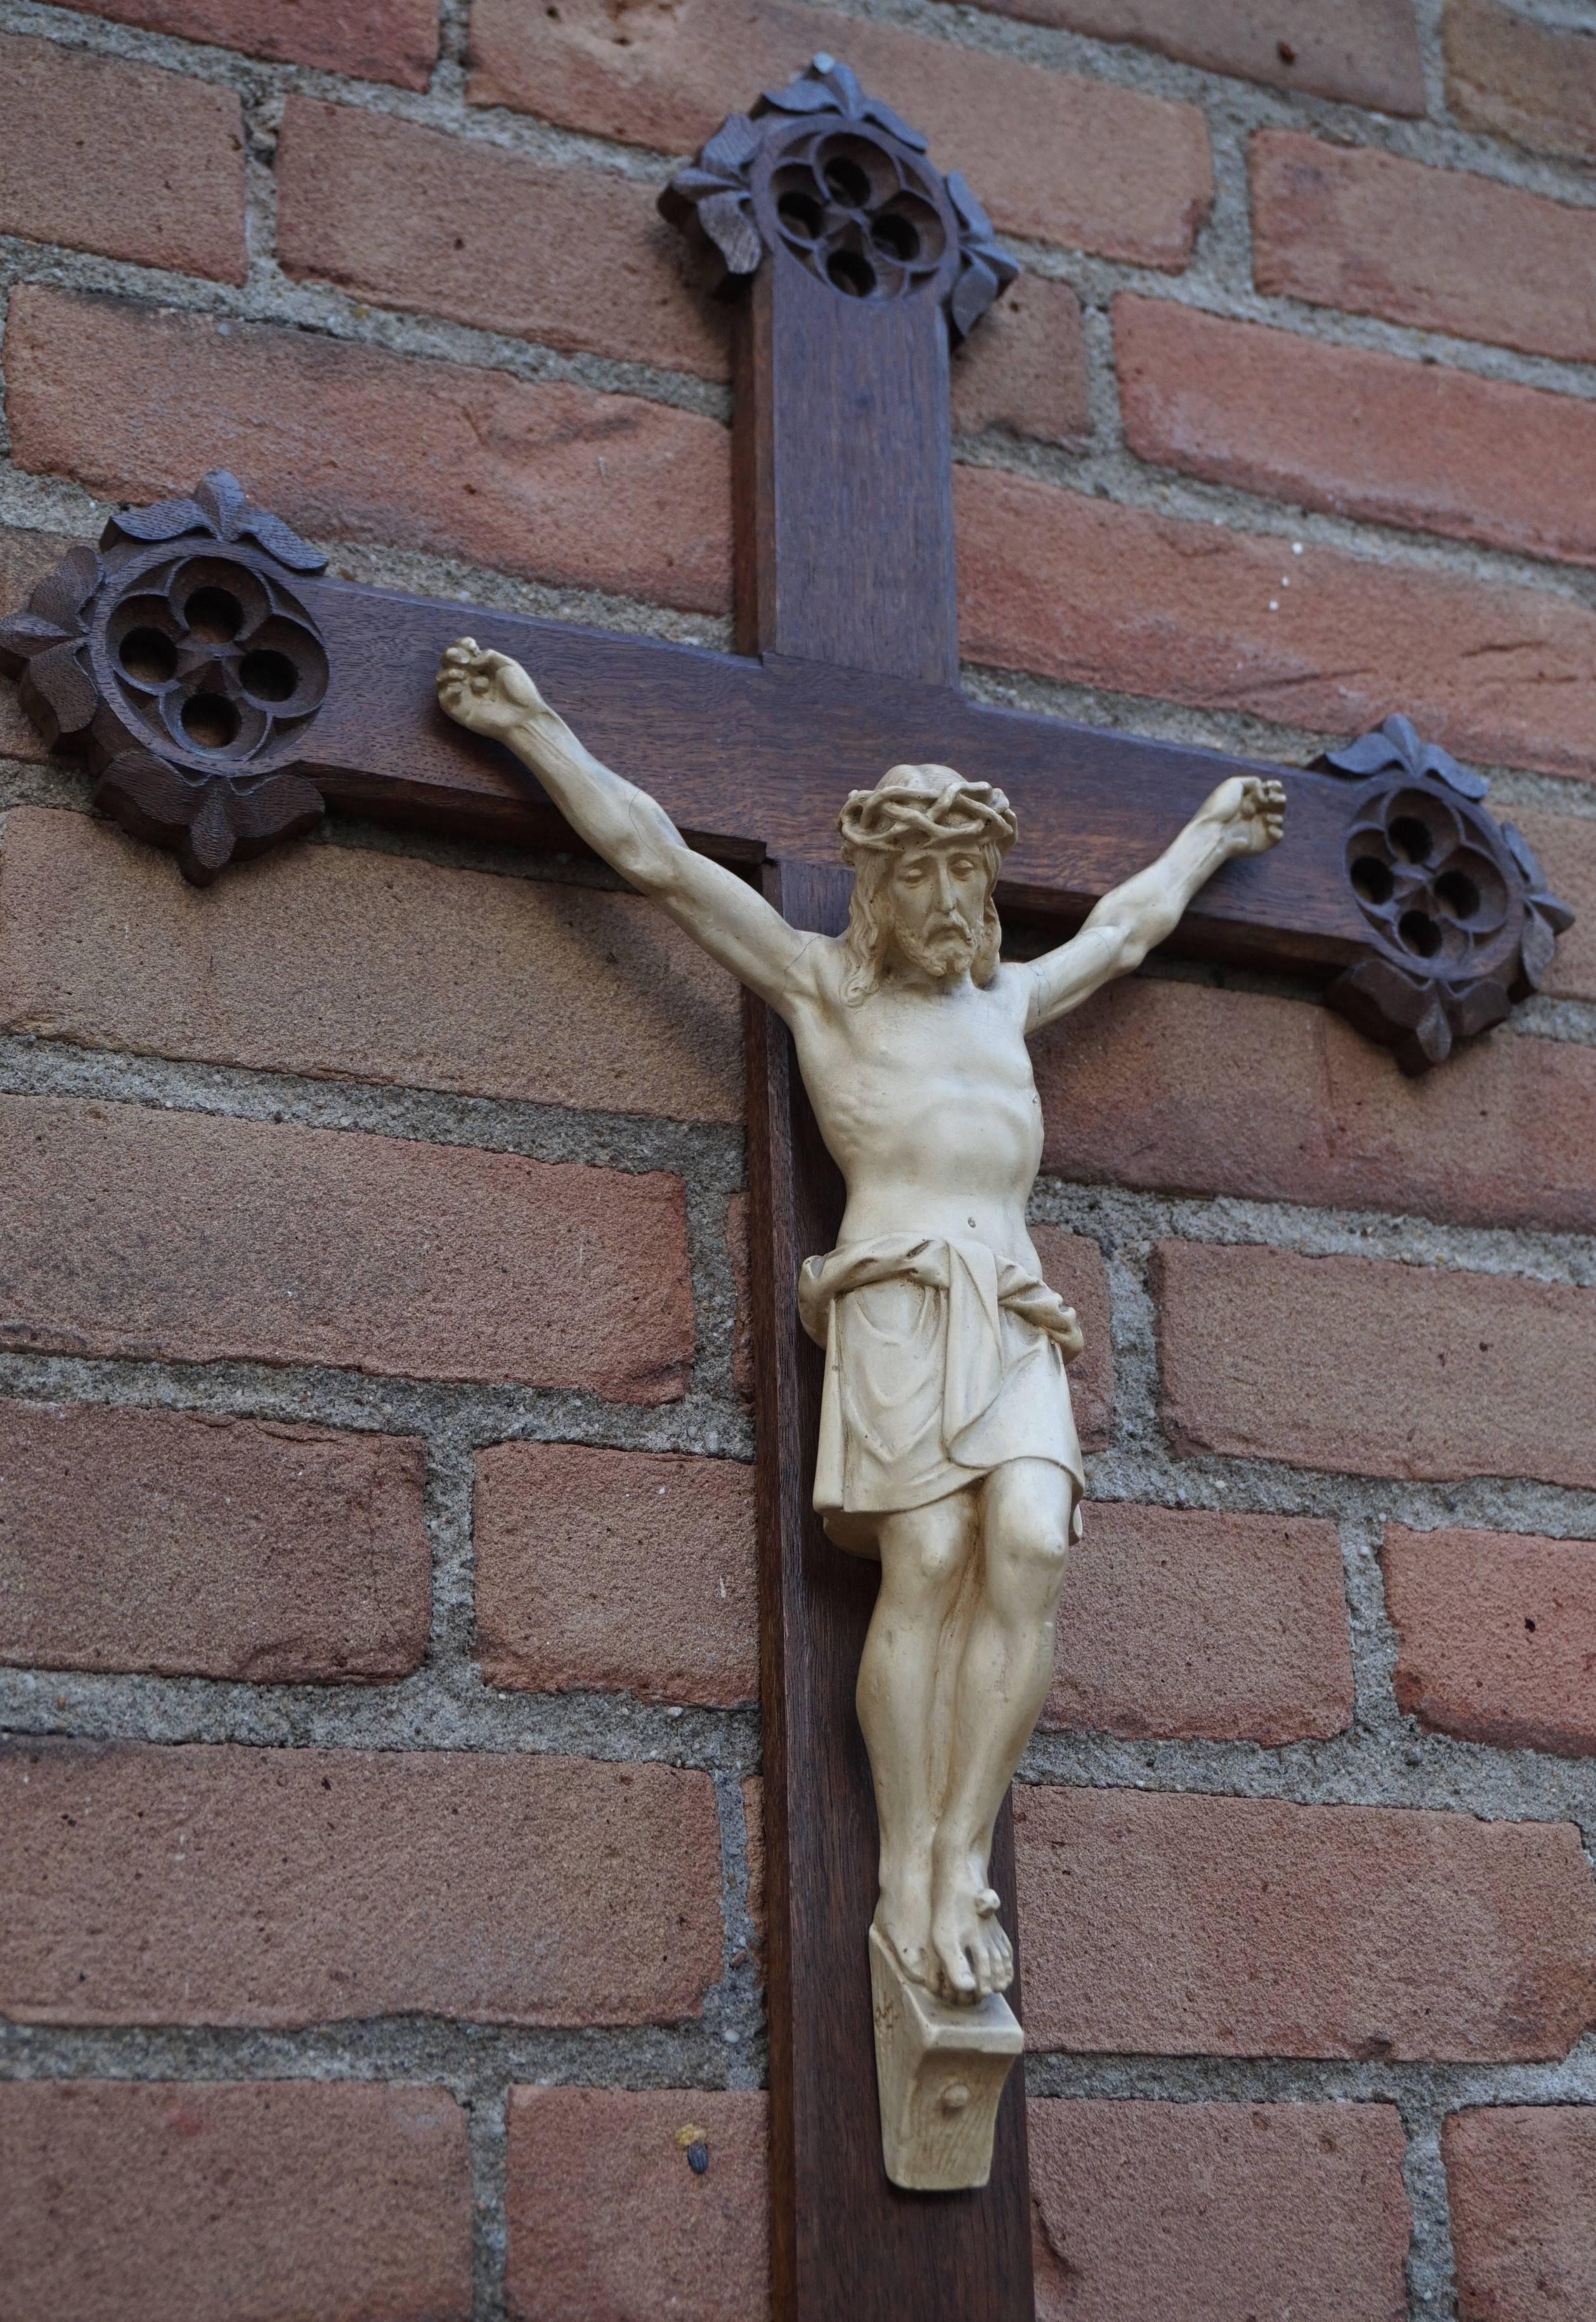 Gothic style oak crucifix with a white clay corpus of Christ.

What makes this rare crucifix extra stylish are the Gothic Revival elements that are hand-carved on the ends of each side. They make the look and feel of this antique religious artifact